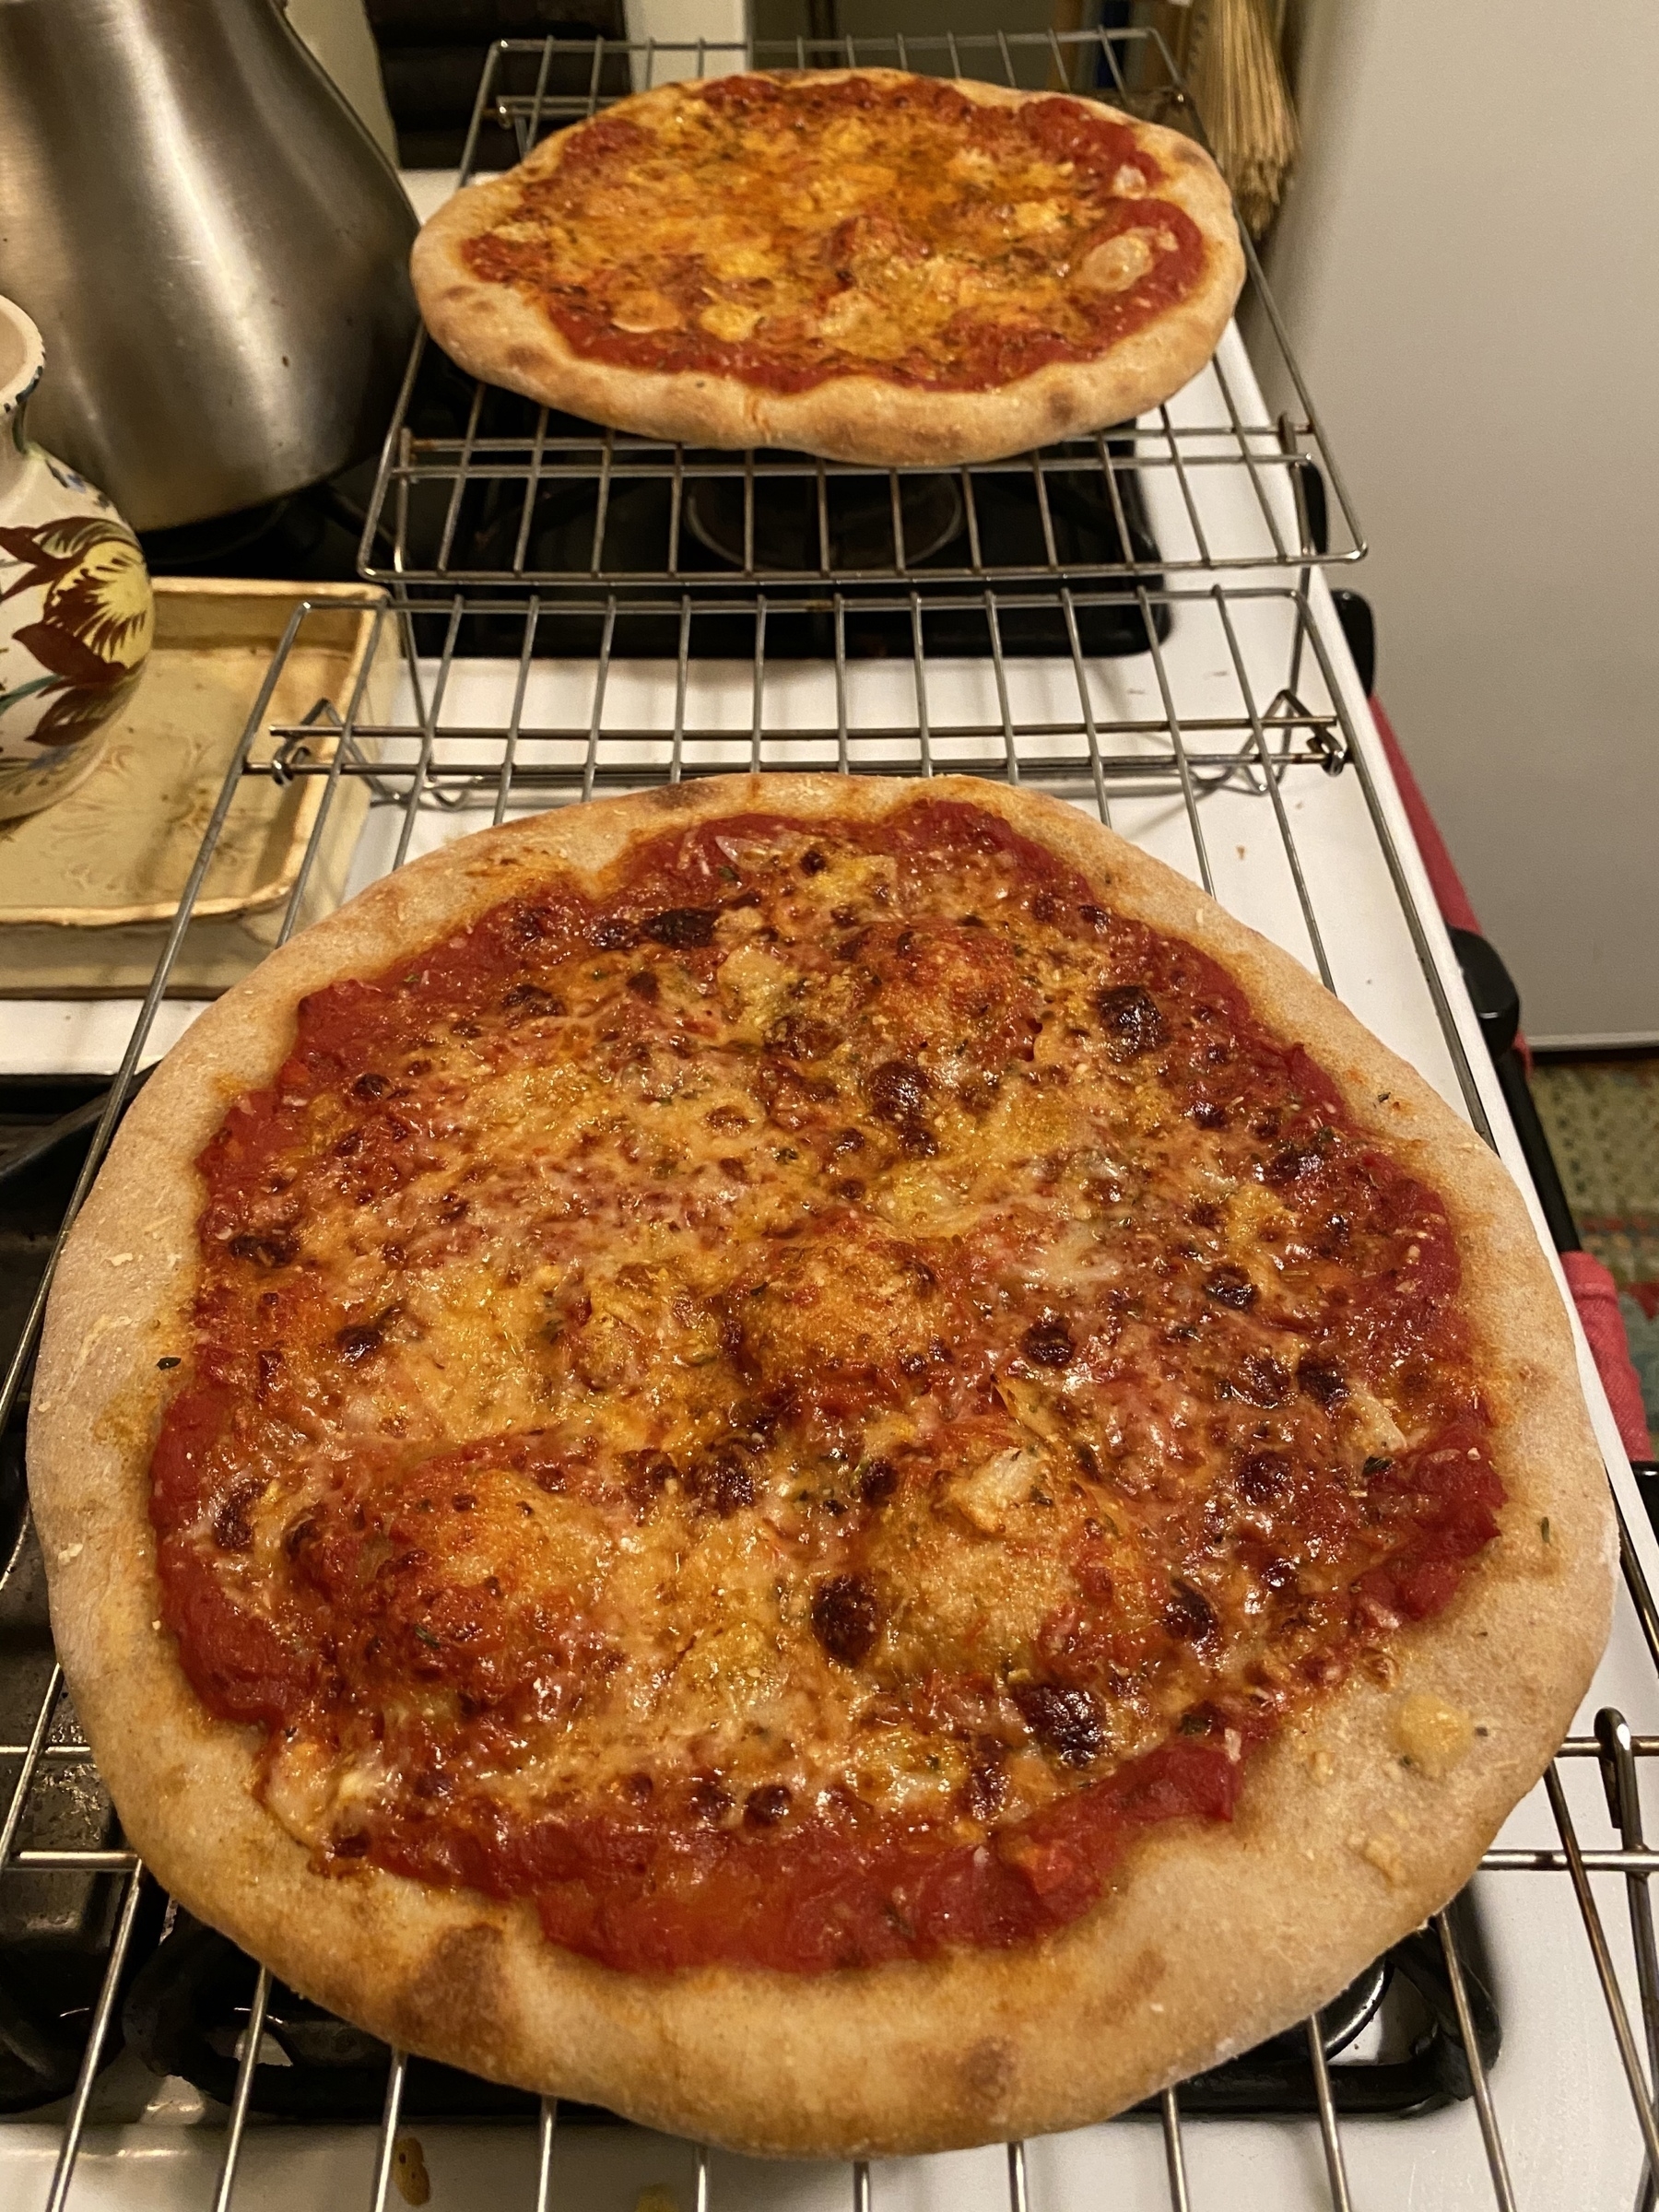 Two small pizzas on cooling racks on a stove.